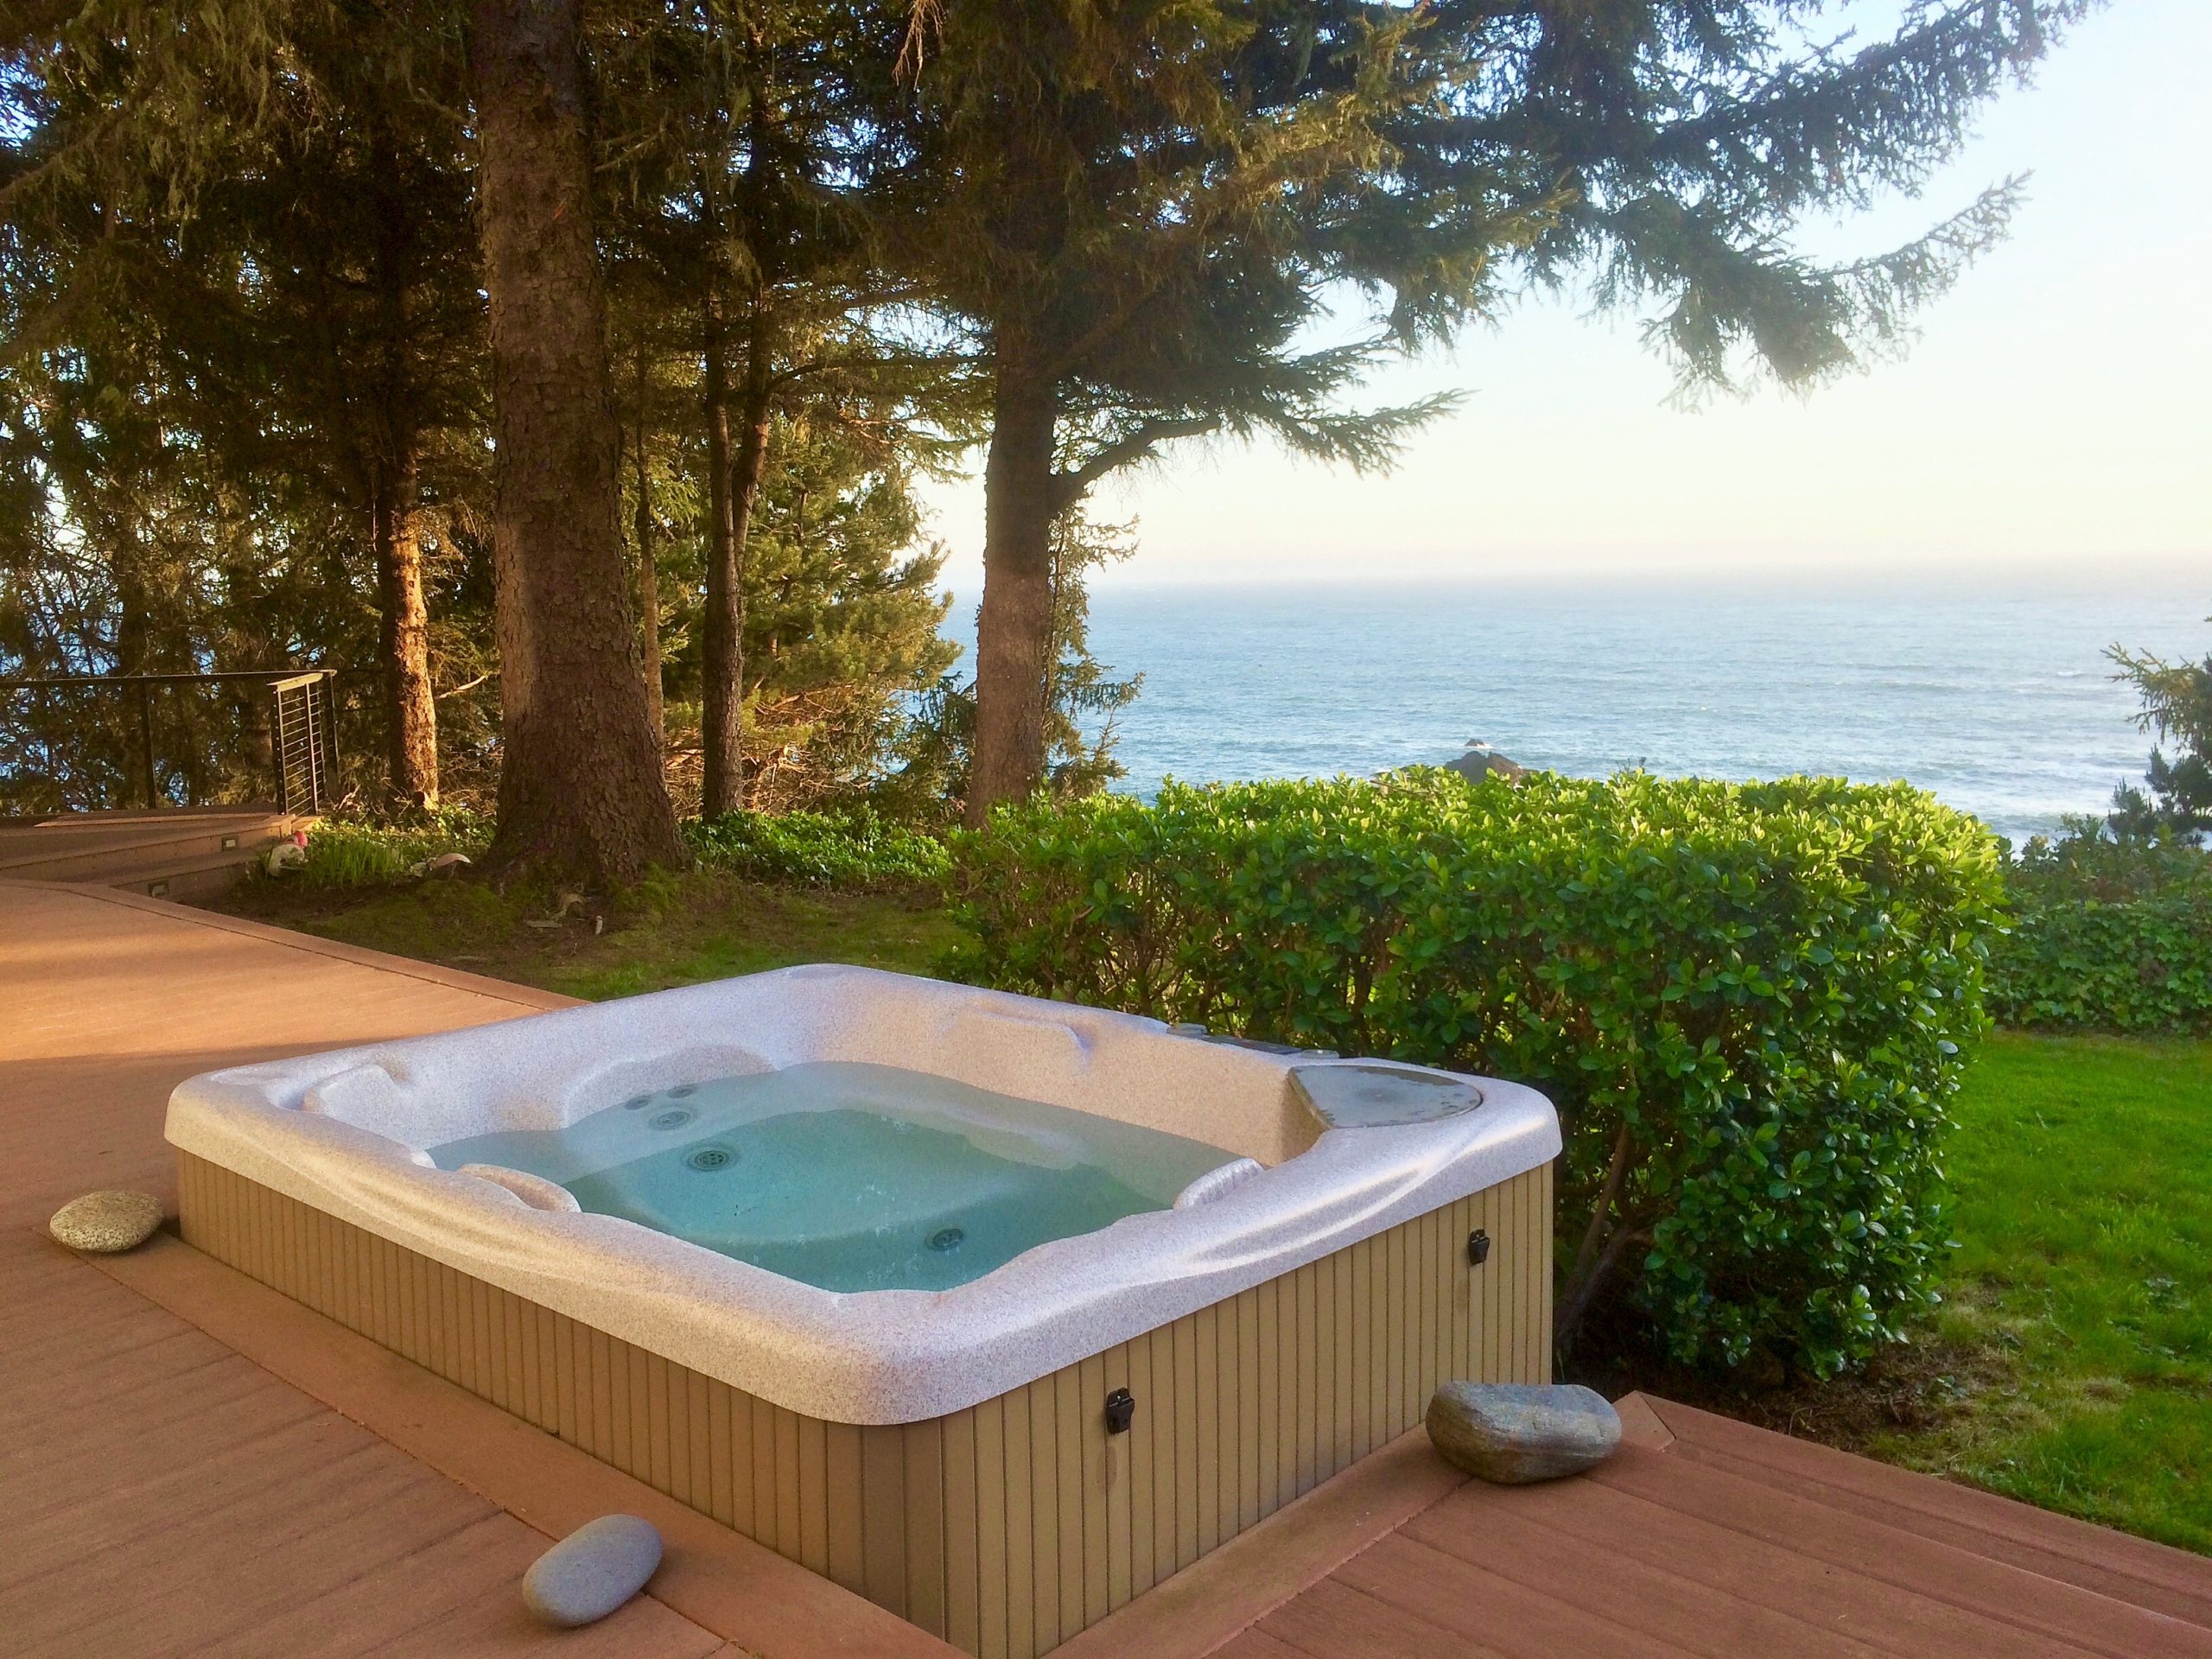 Photo of large hot tube on the deck with greenery and ocean view